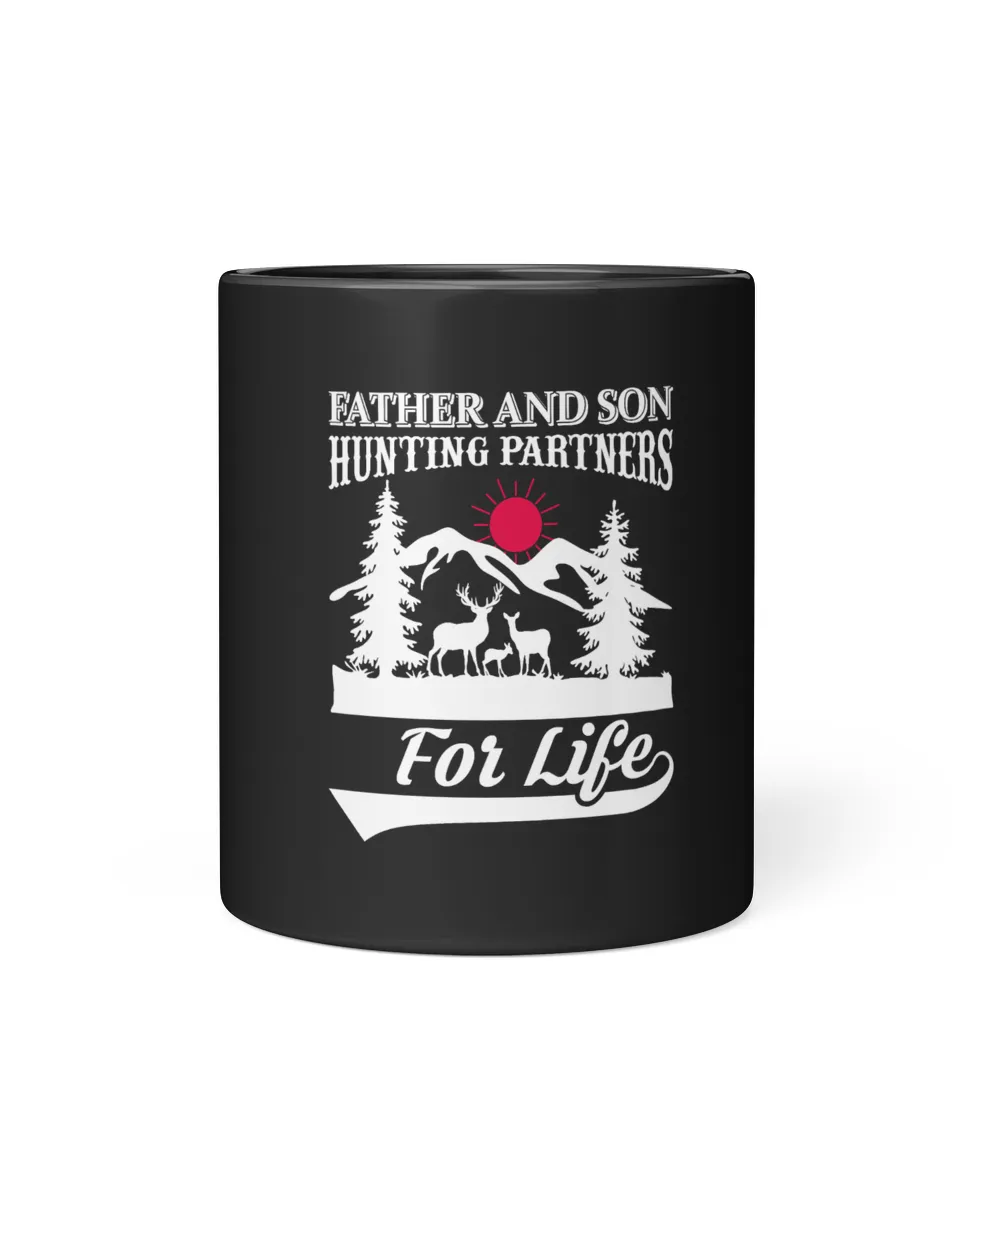 Eather and son hunting partners for life